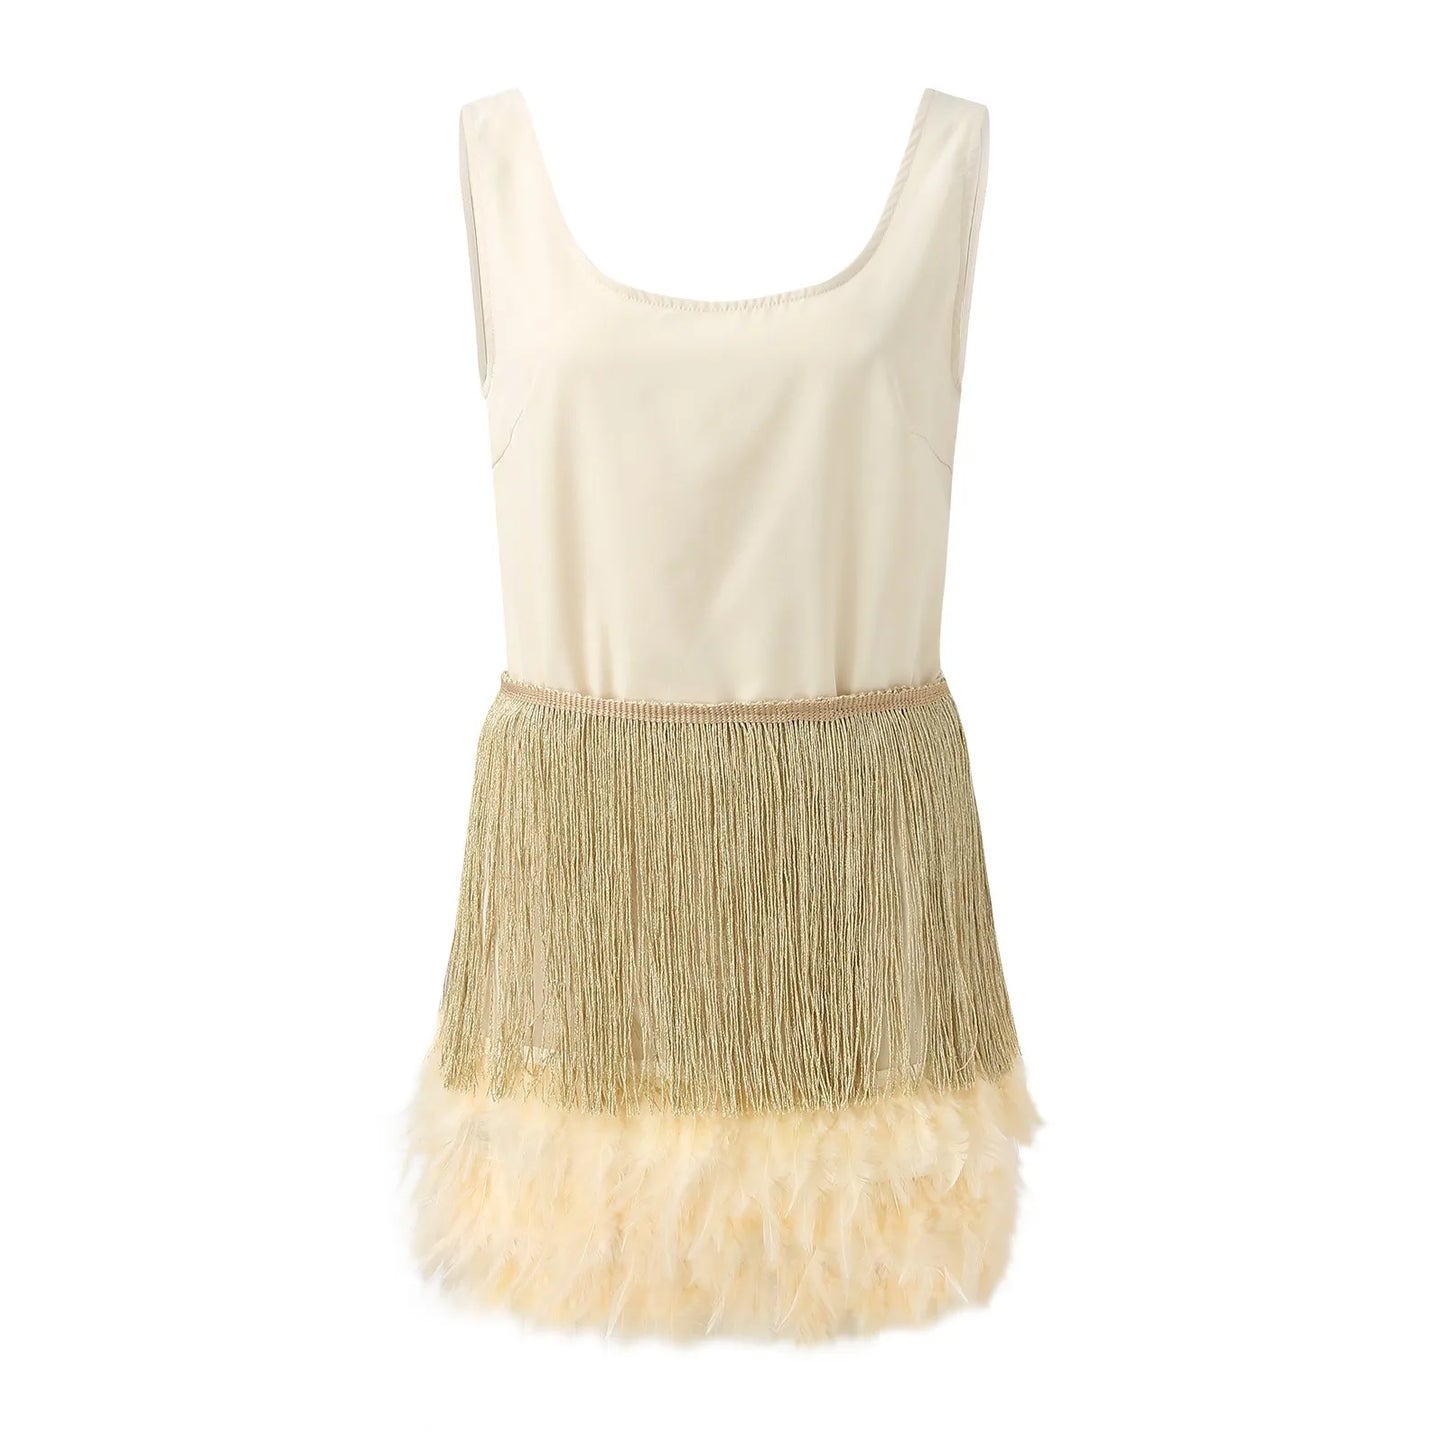 FashionSierra - Sexy Fringe Feather Vest Skirt Set Chic Sleeveless Solid Tank Pencil Mini Skirts Female Party Club Tassel Outfits Dress